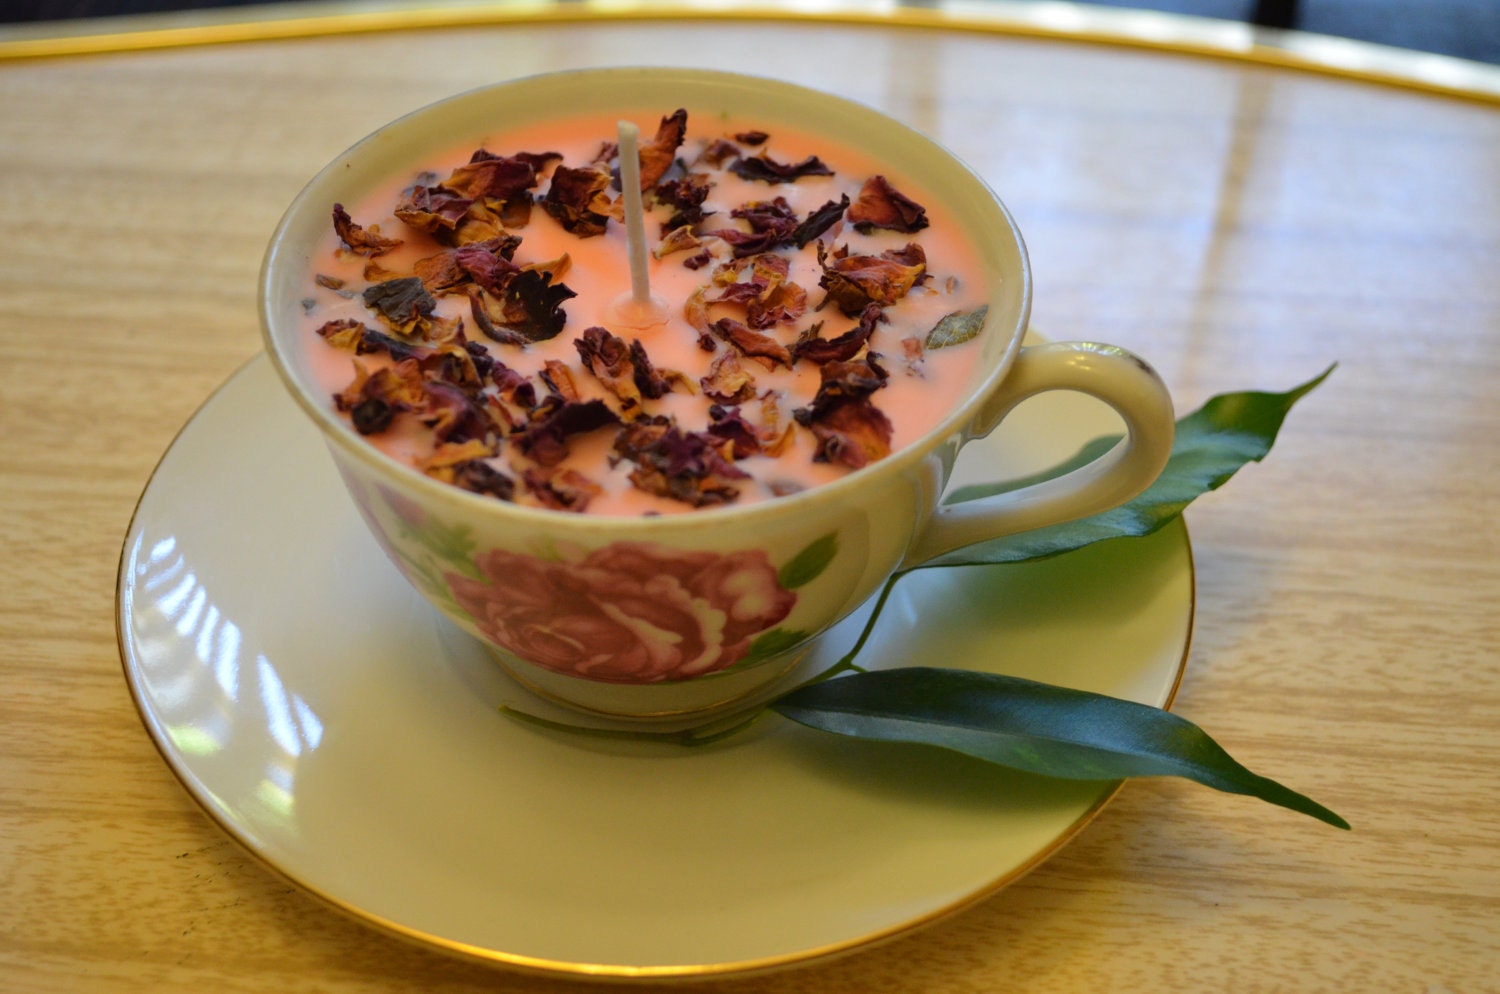 Beautiful Rose Teacup 100% Soy Candle with Dried Rose Petals and Strawberry Kiwi Scent 4oz (with Saucer)